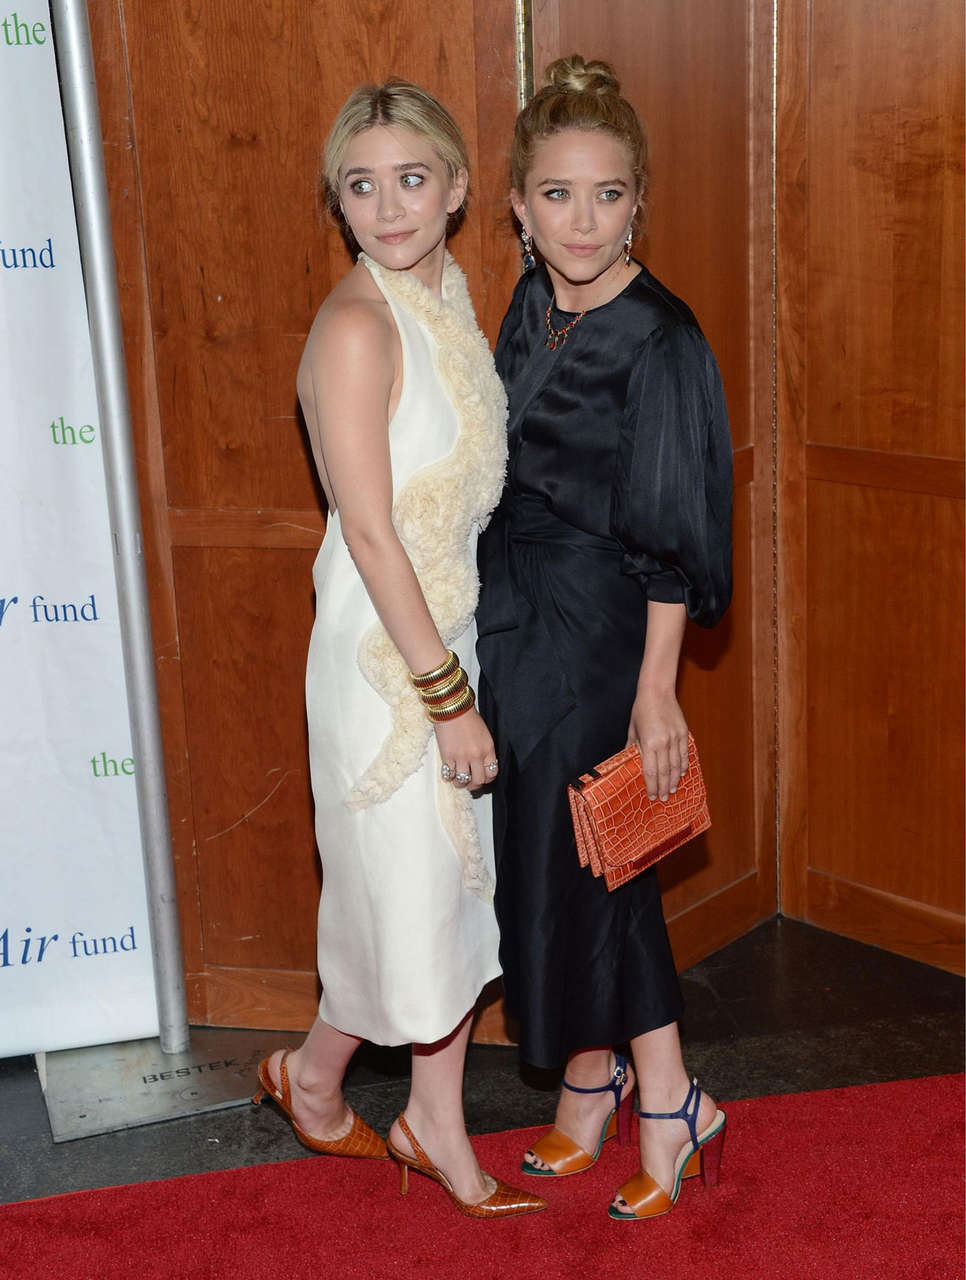 Mary Kate Ashley Olsen Fresh Air Fund Salute To American Heroes